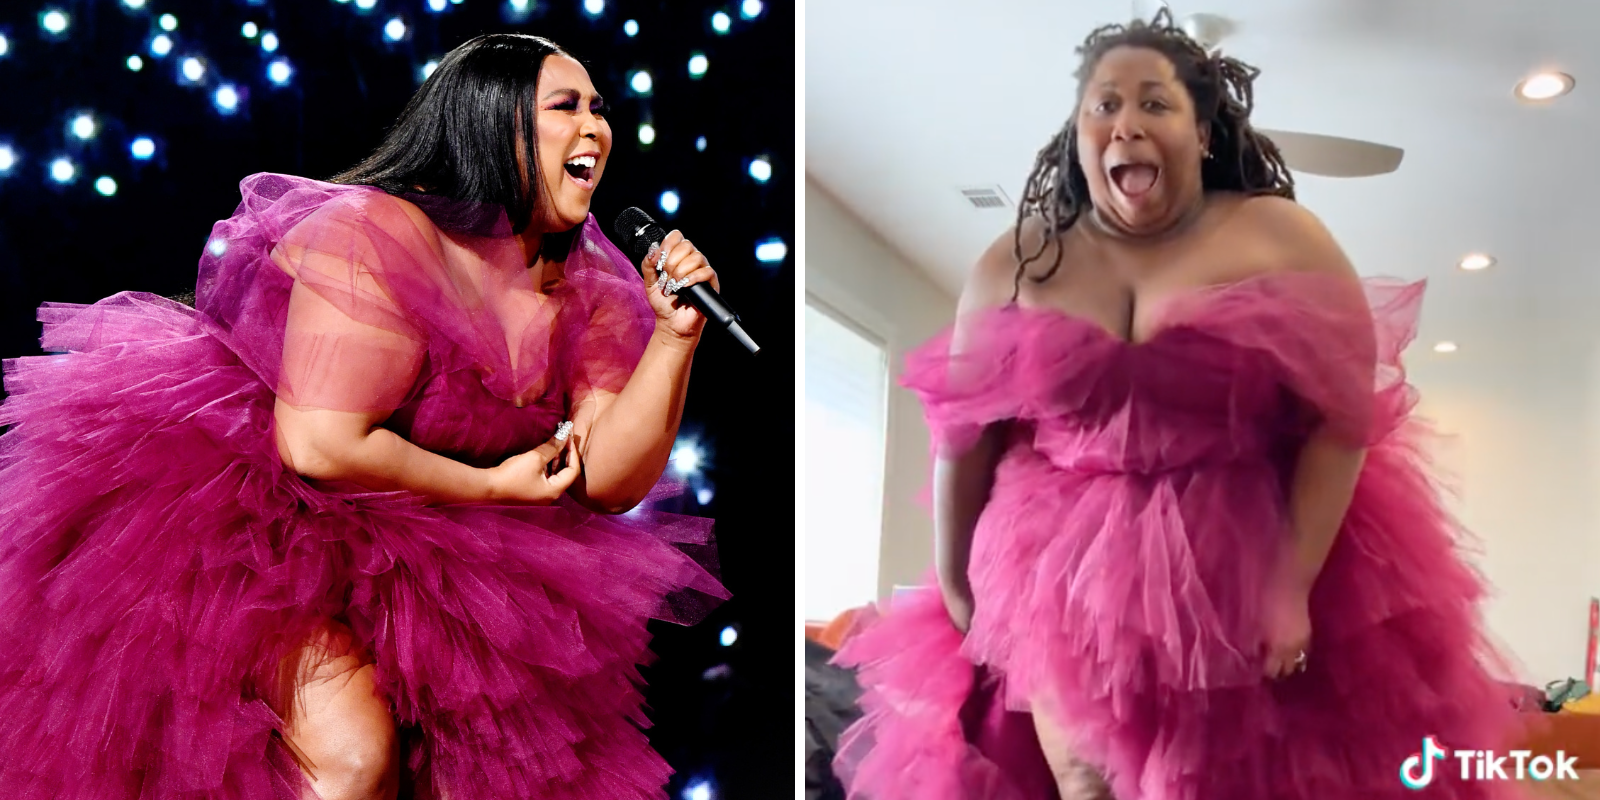 A side-by-side of two photos: on the left, Lizzo is in a pink chiffon fluffy dress performing on stage; on the right, queer poet Aurielle Marie , a nonbinary black femme with dreadlocks down their back, wears the same pink dress while in their living room.